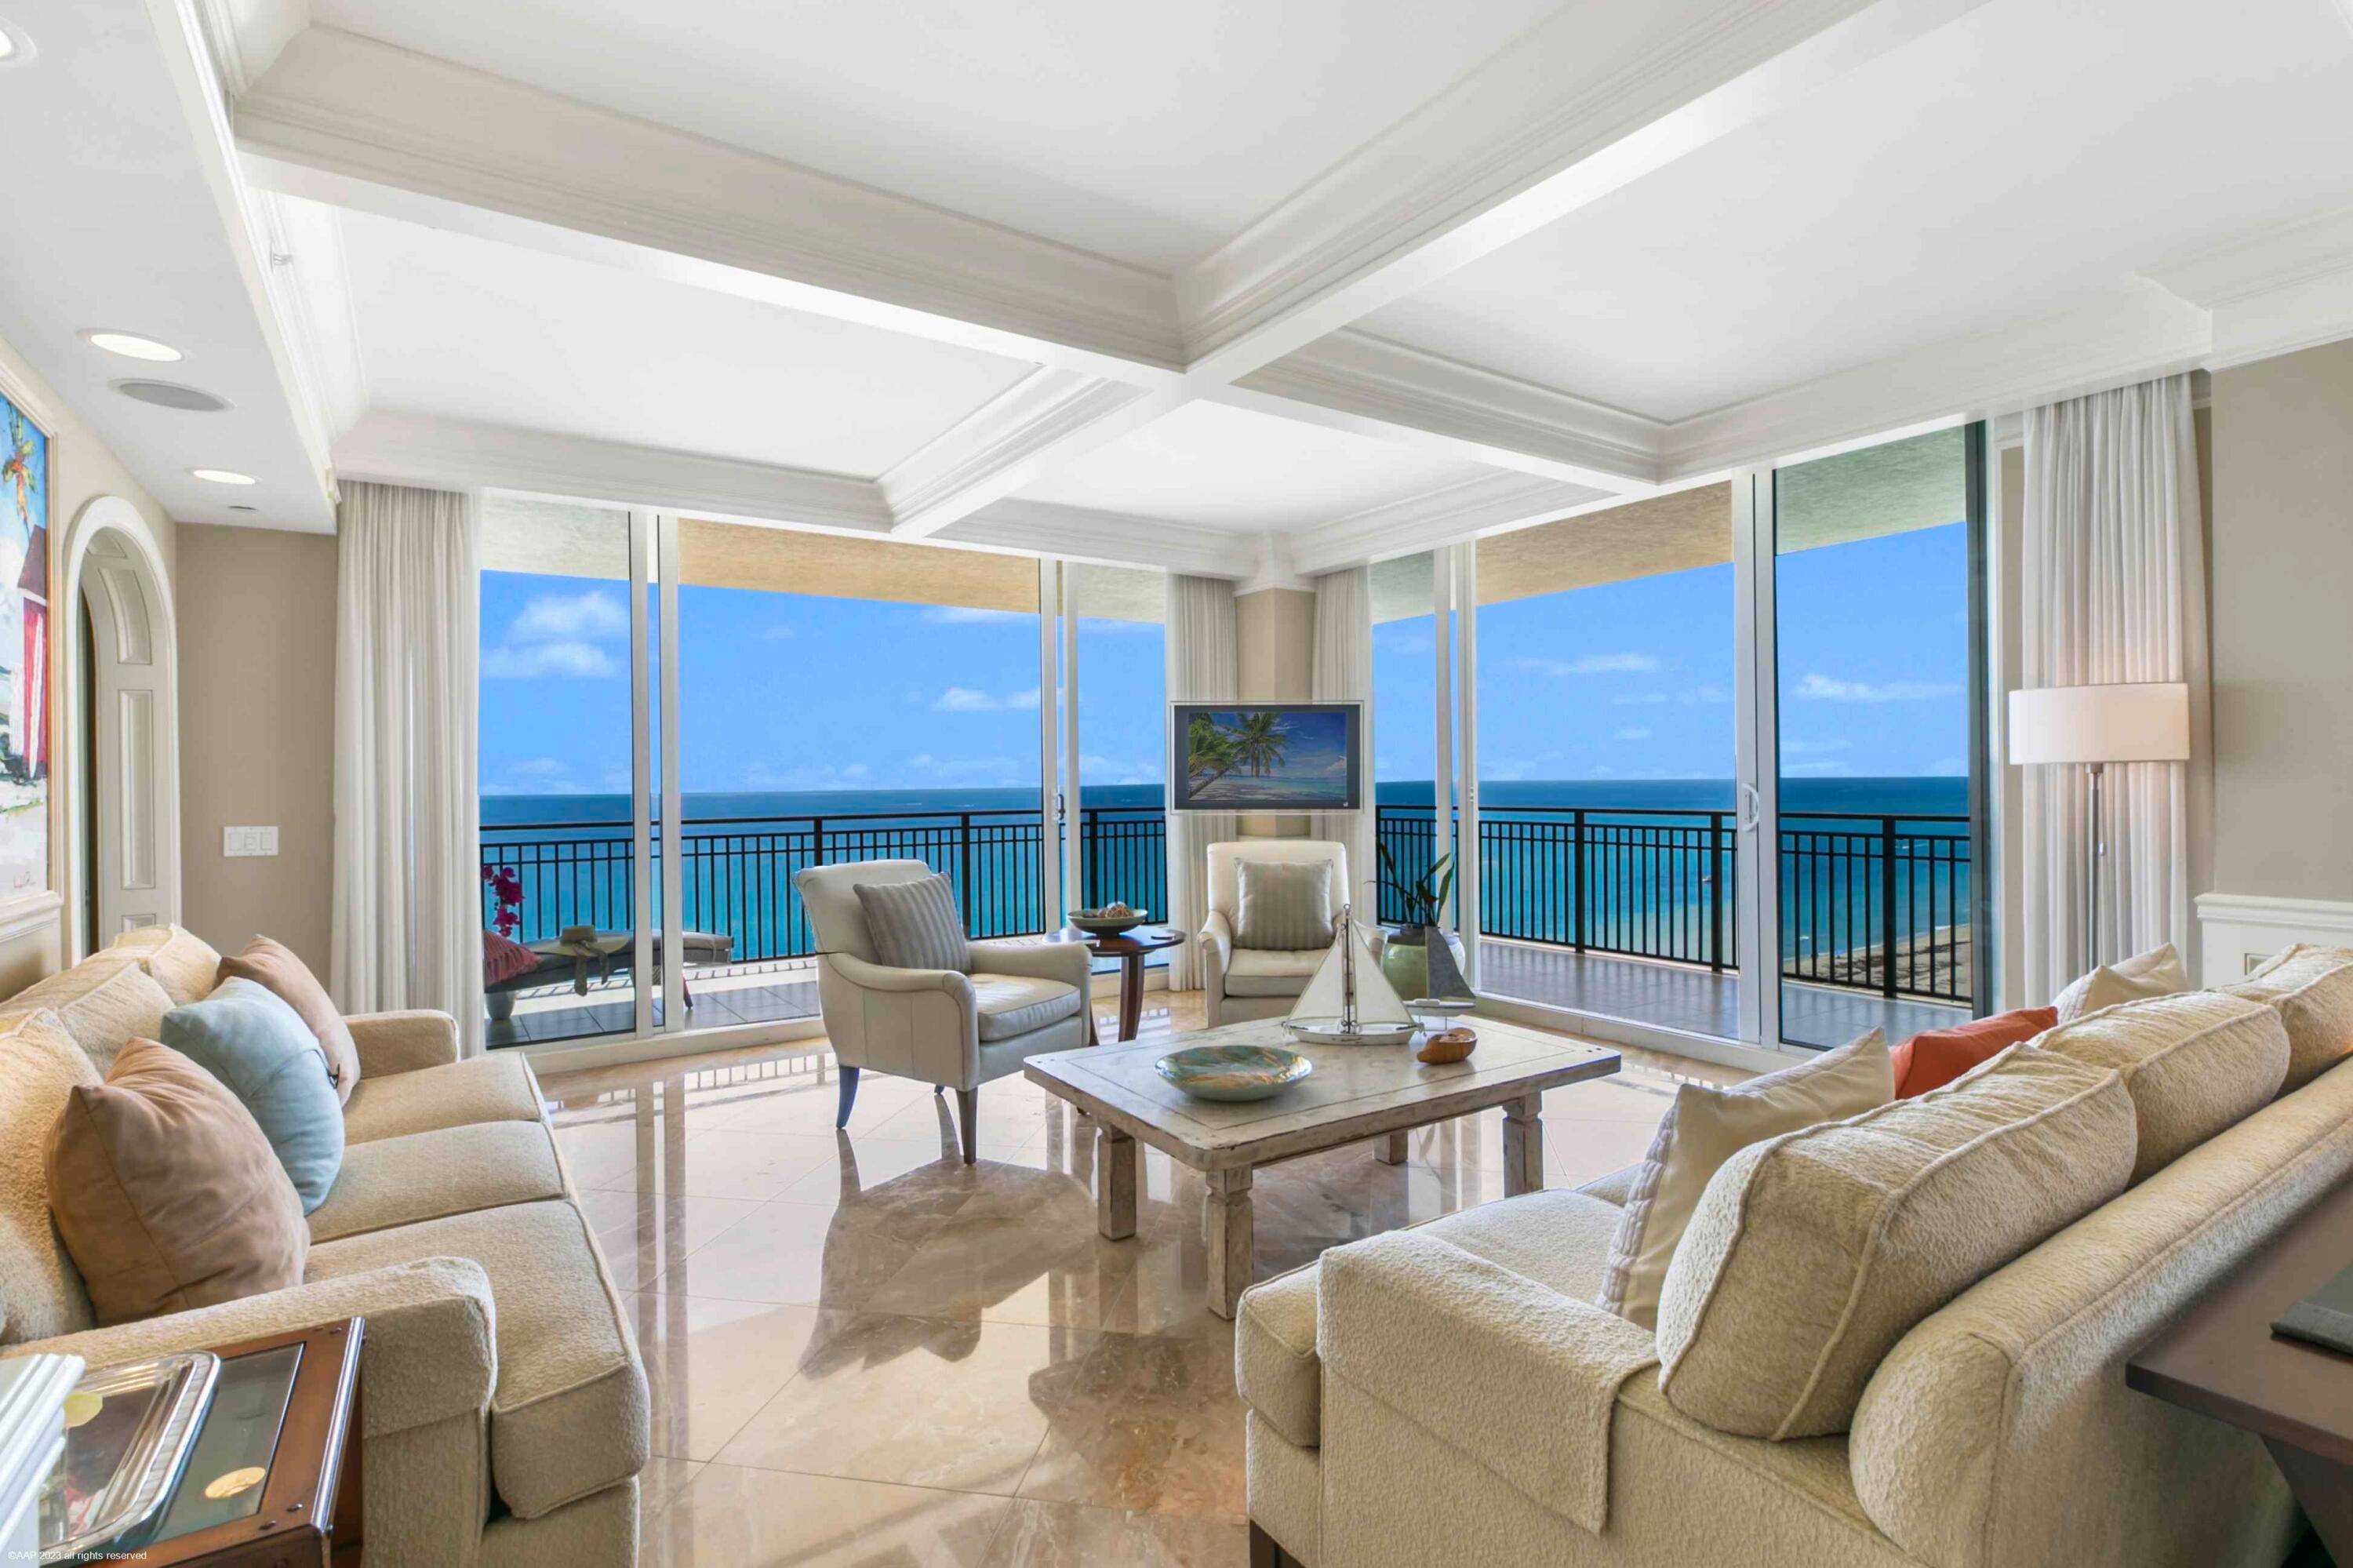 This rare 4 bedroom 5 bath ensuite, oceanfront gem at the Resort Residences of Singer Island, has spectacular direct, southeastern ocean and coastline views from every room.